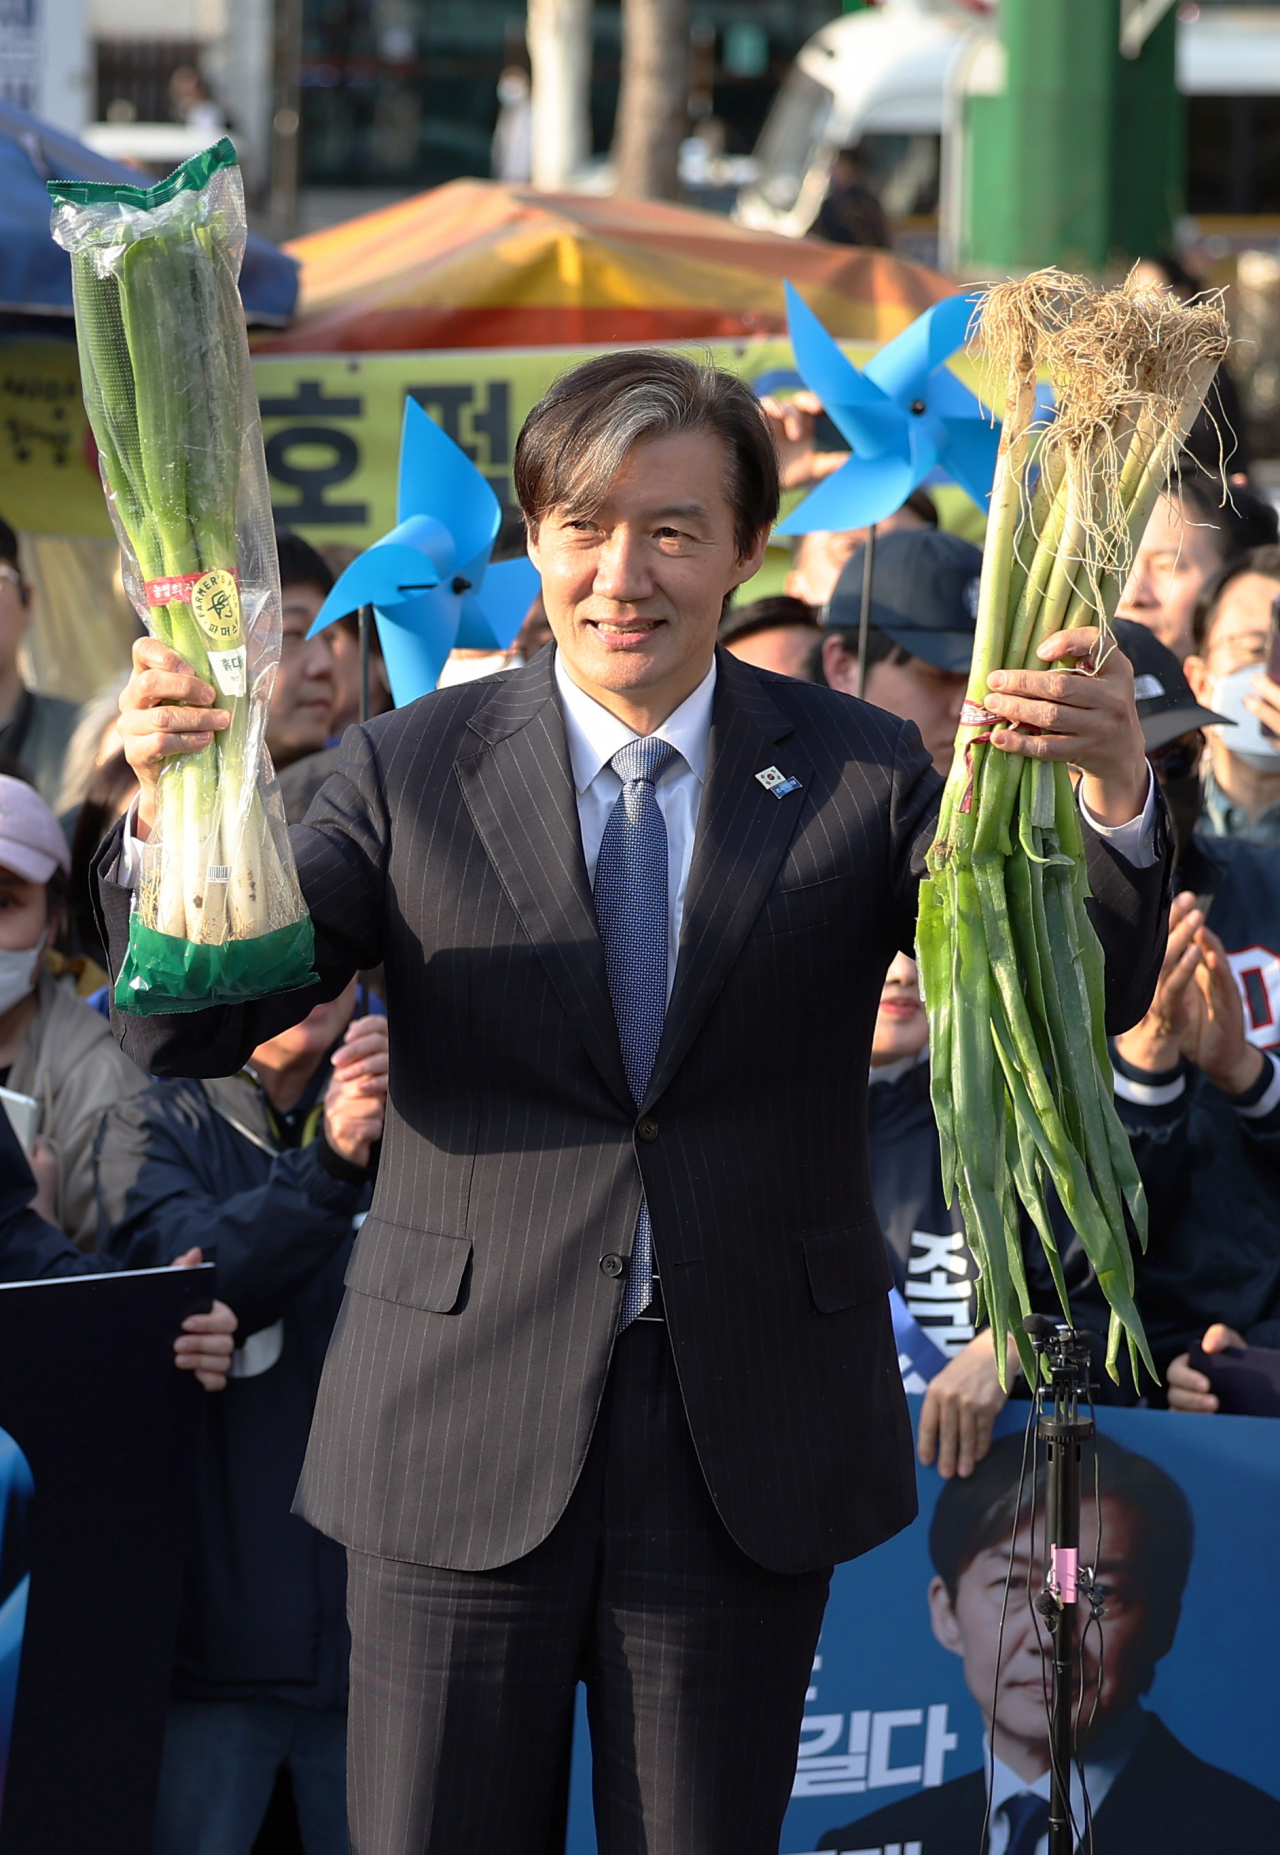 Cho Kuk, who leads the Rebuilding Korea Party, holds bundles of scallions during his visit to Seongnam, Gyeonggi Province, on April 1. (Yonhap)